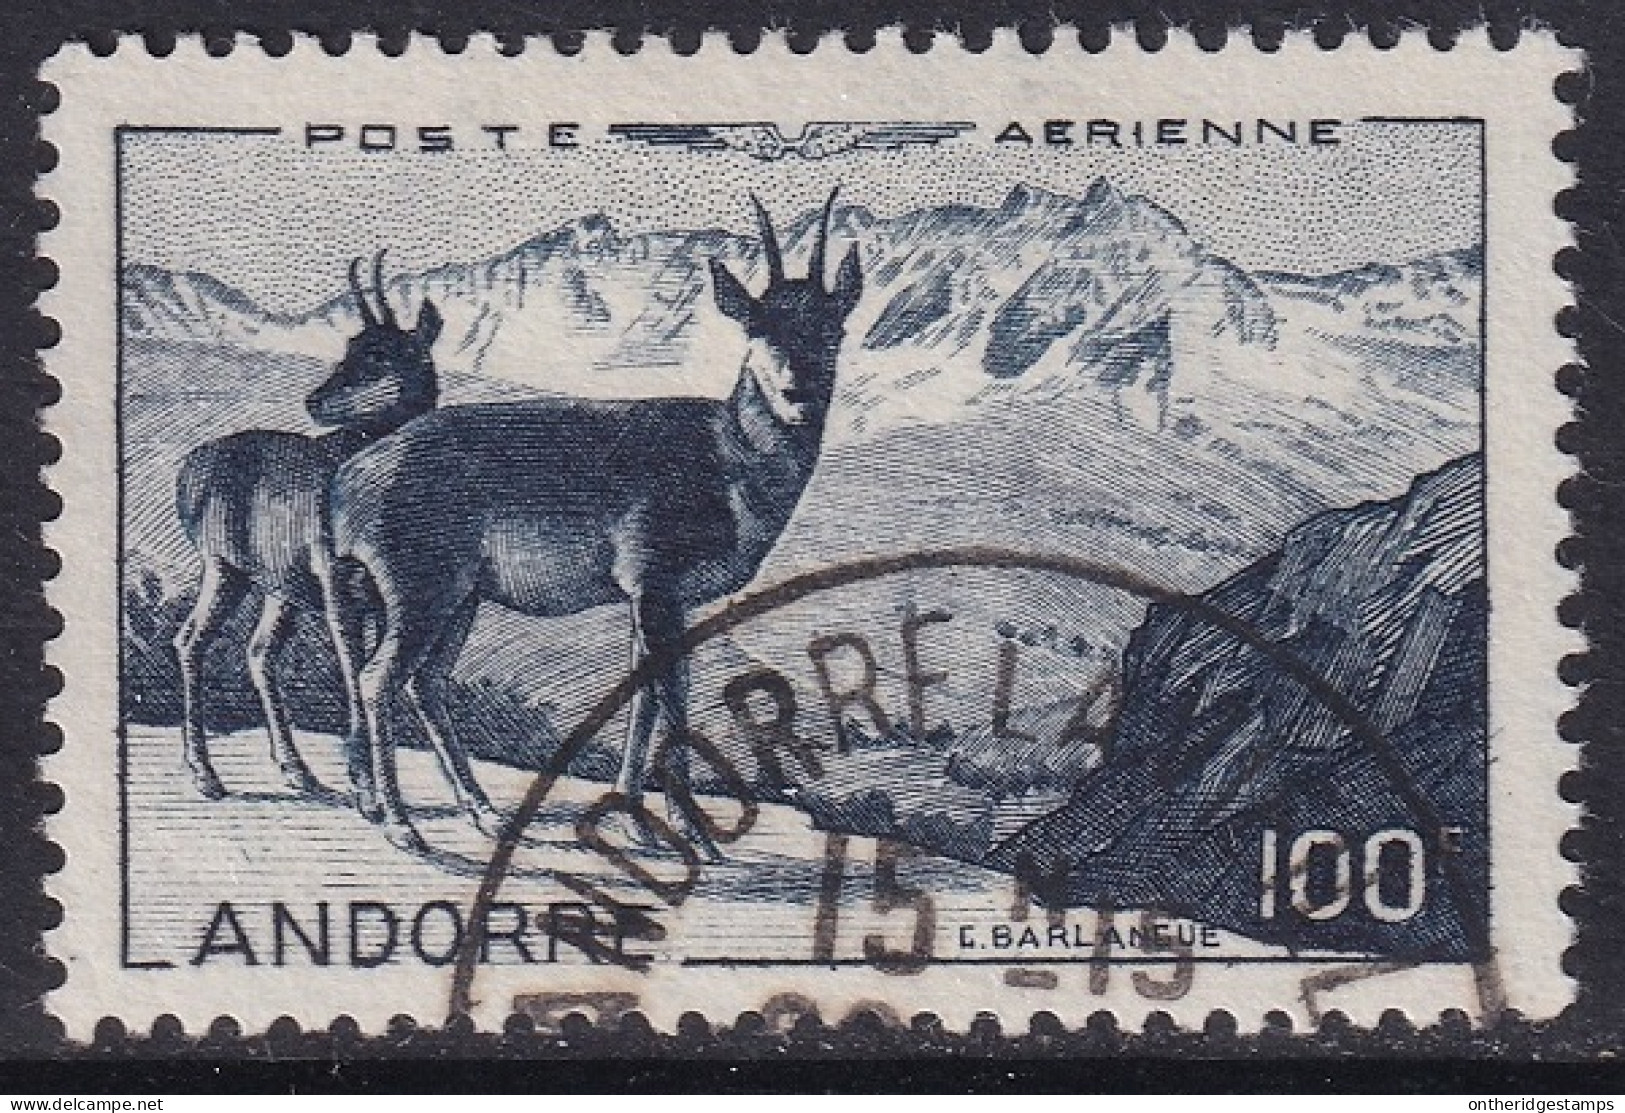 Andorra French 1950 Sc C1 Andorre PA1 Air Post Used - Luftpost